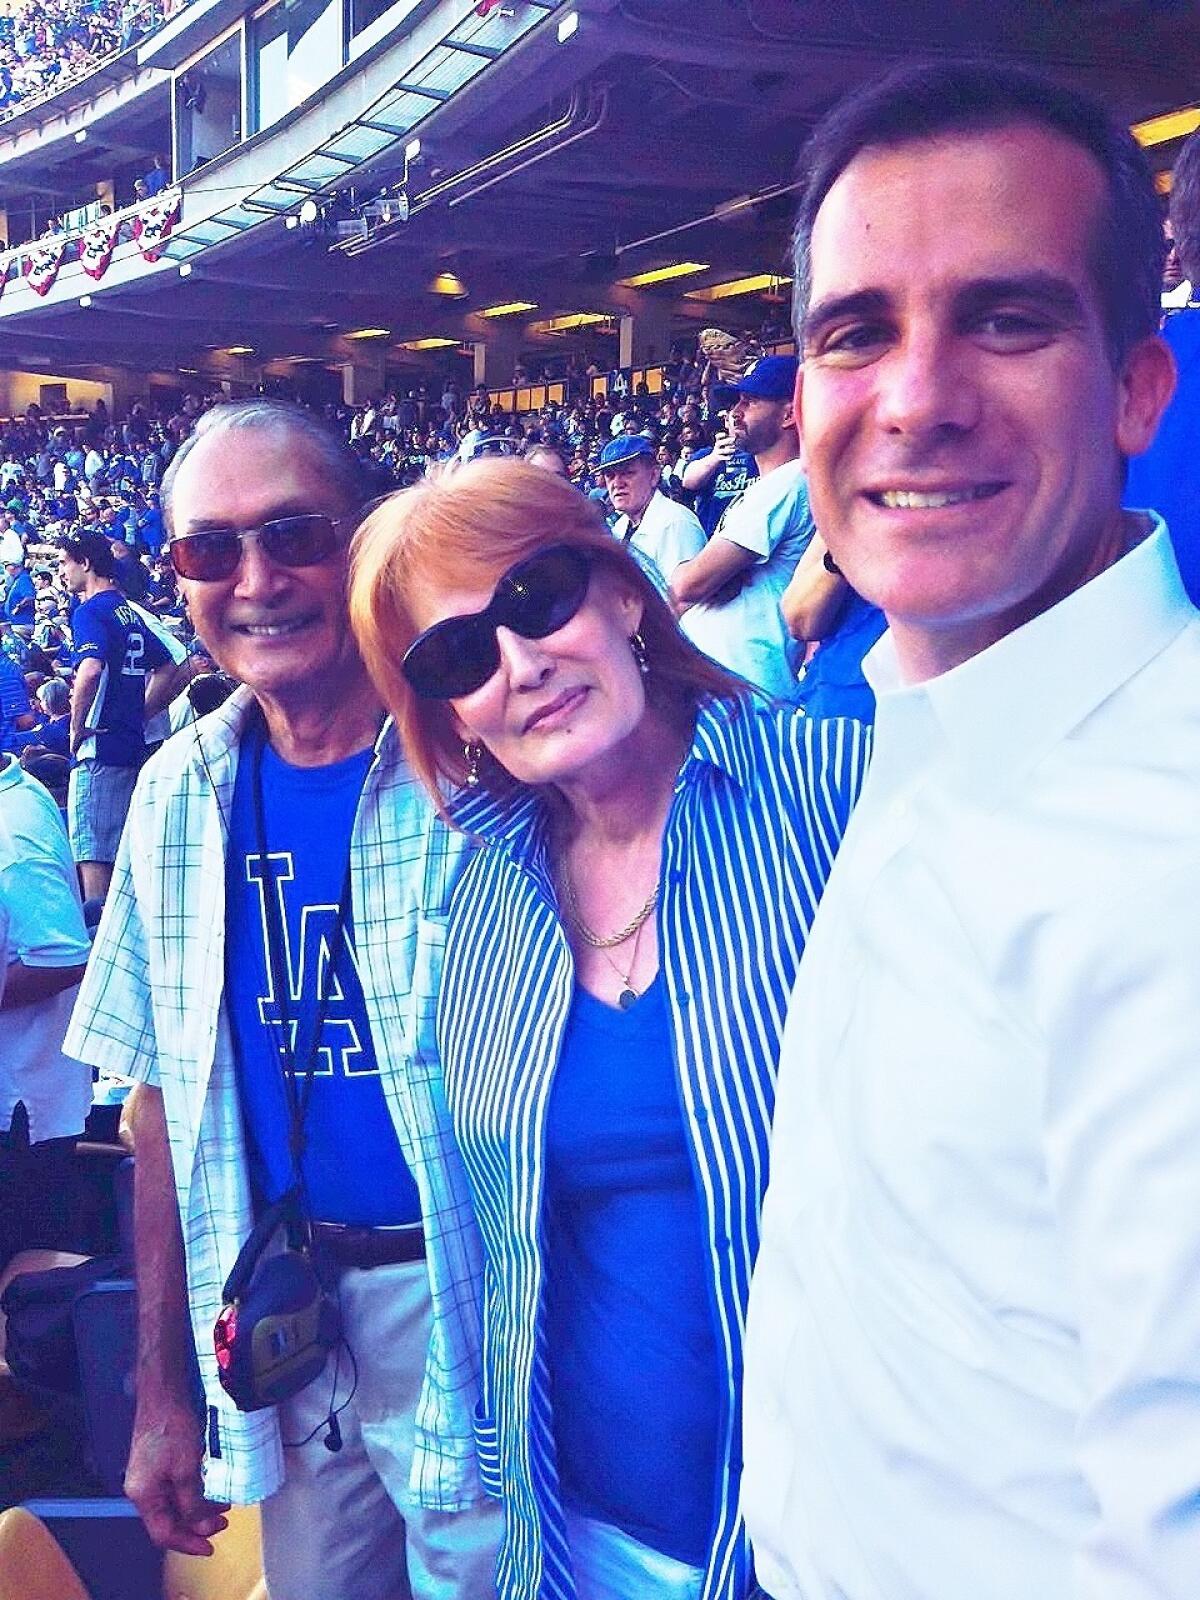 Suzanne Lewis poses with her father, Louis Avila, and L.A. Mayor Eric Garcetti at a Dodgers game in 2015.